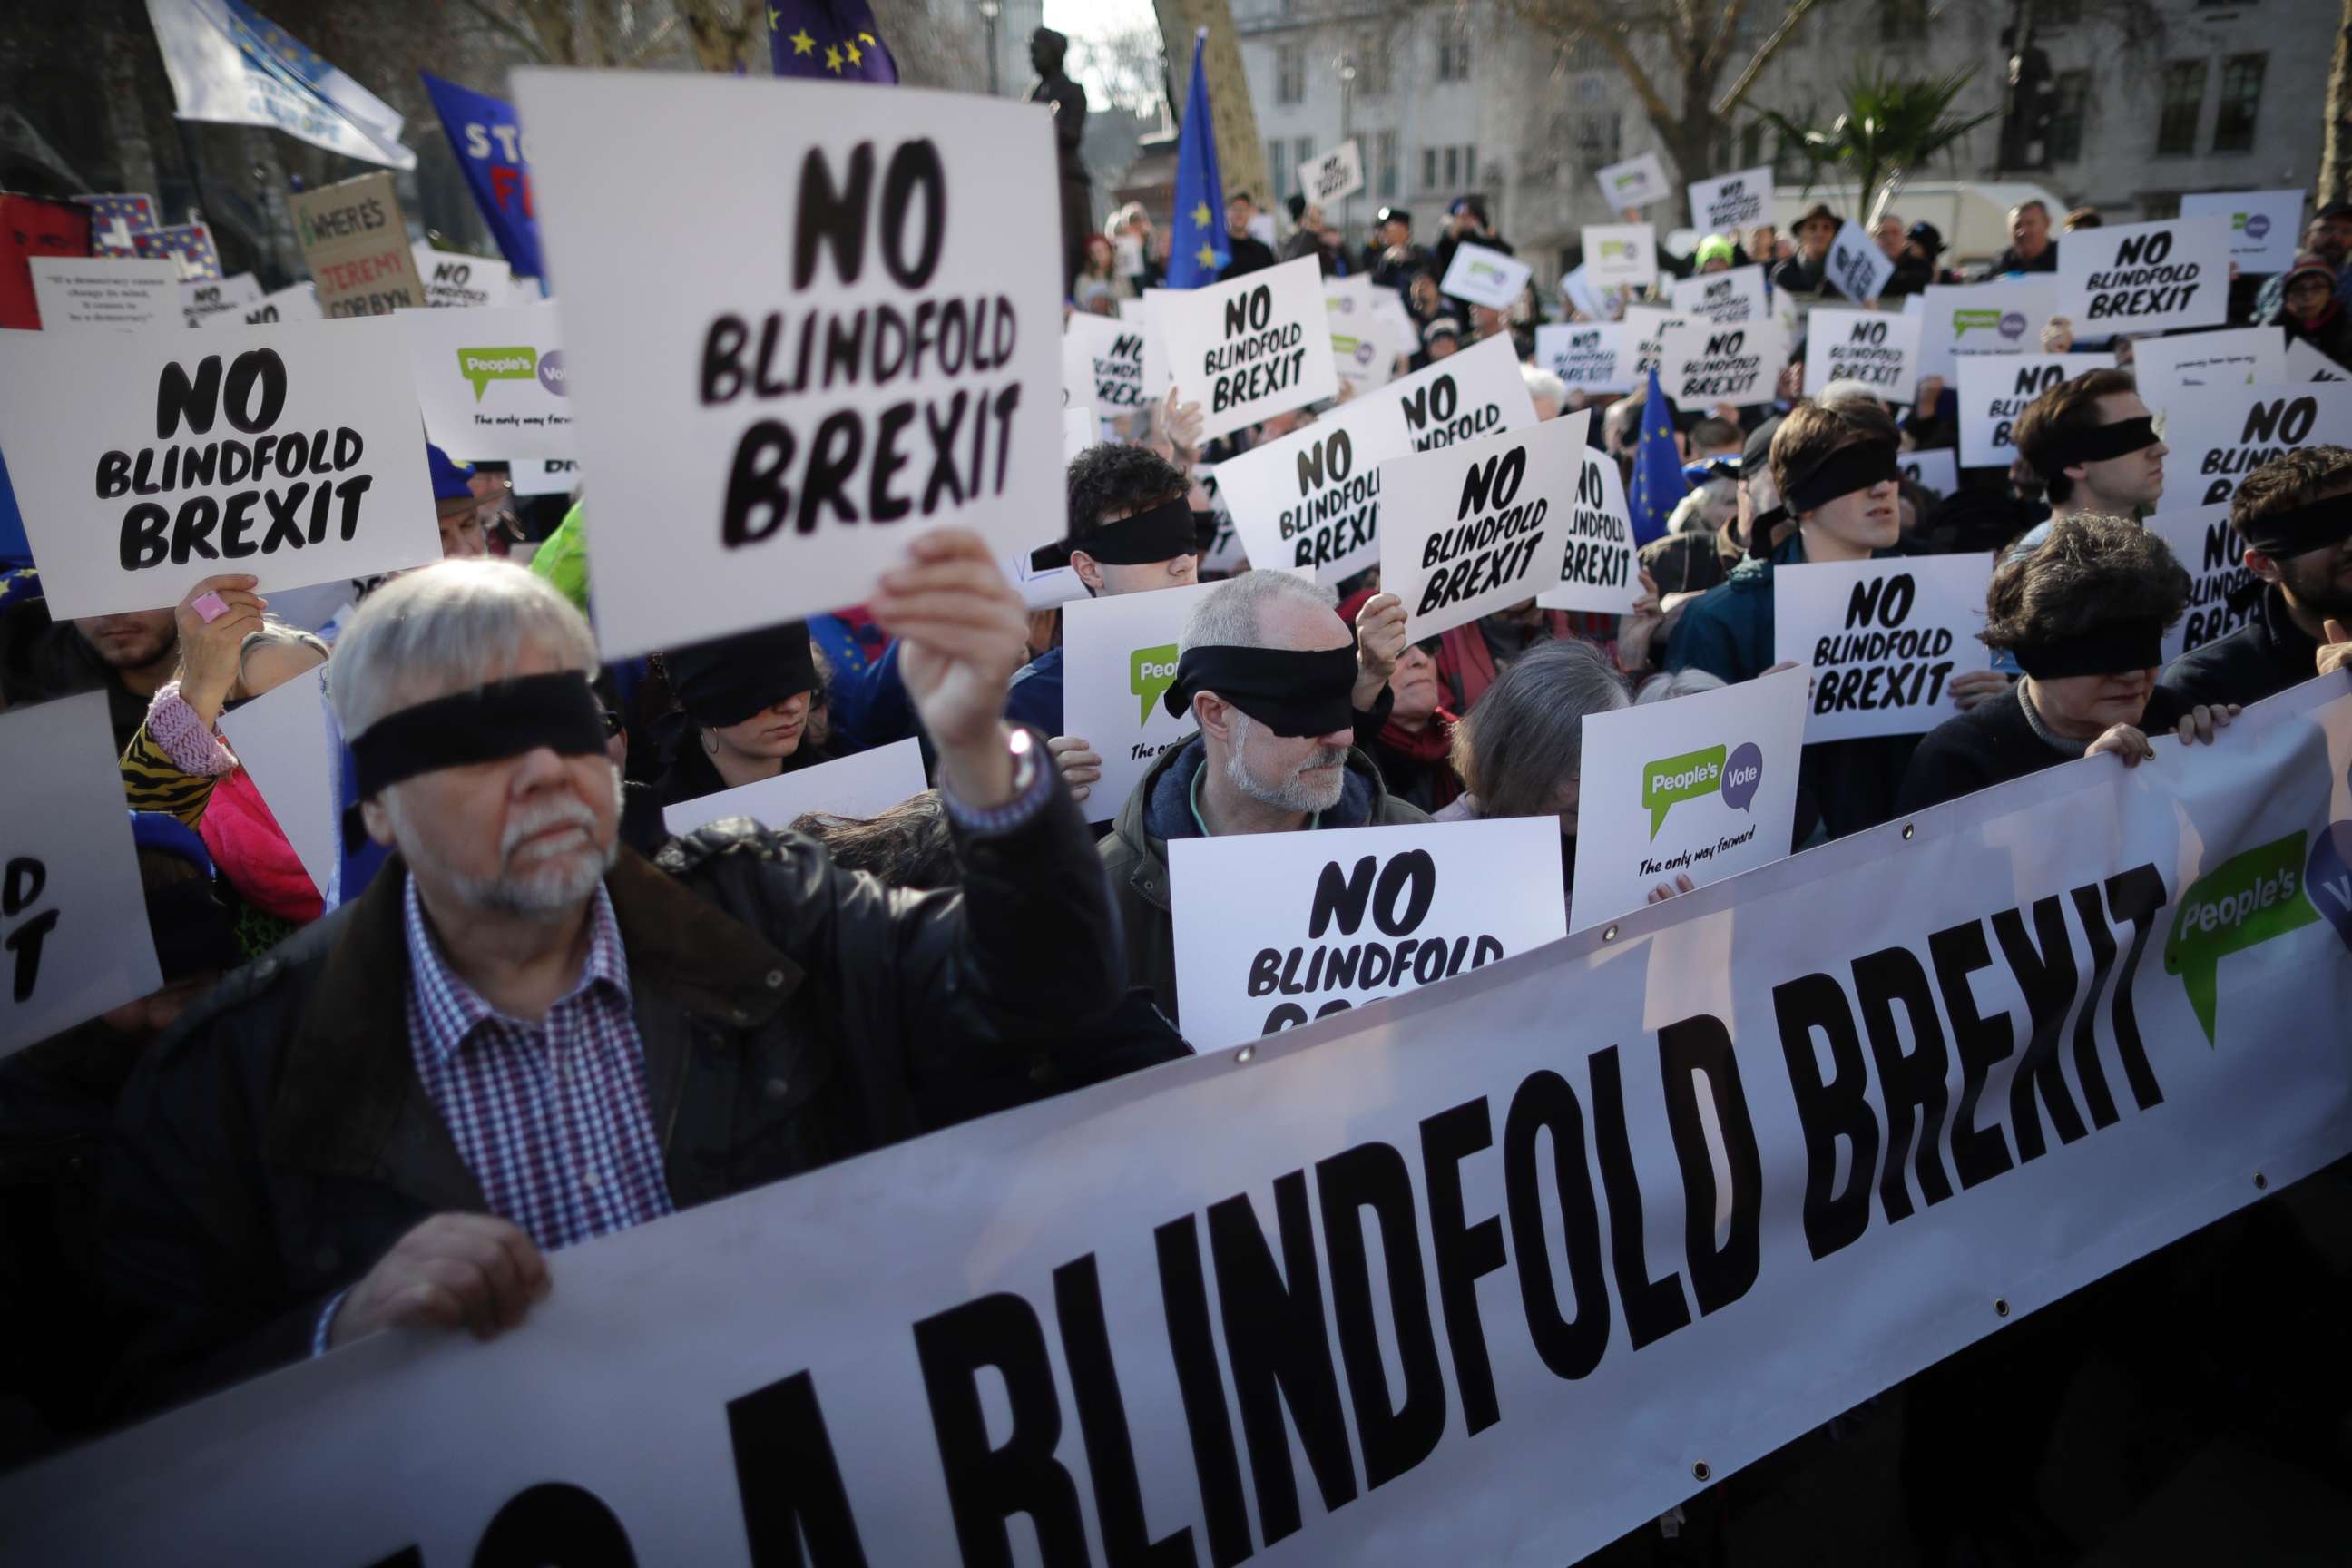 PHOTO: Anti-Brexit activists wear blindfolds as they take part in a protest event organised by the People's Vote Campaign, which calls for a second referendum on Britain's EU membership, in Parliament Square, London, Feb. 14, 2019.